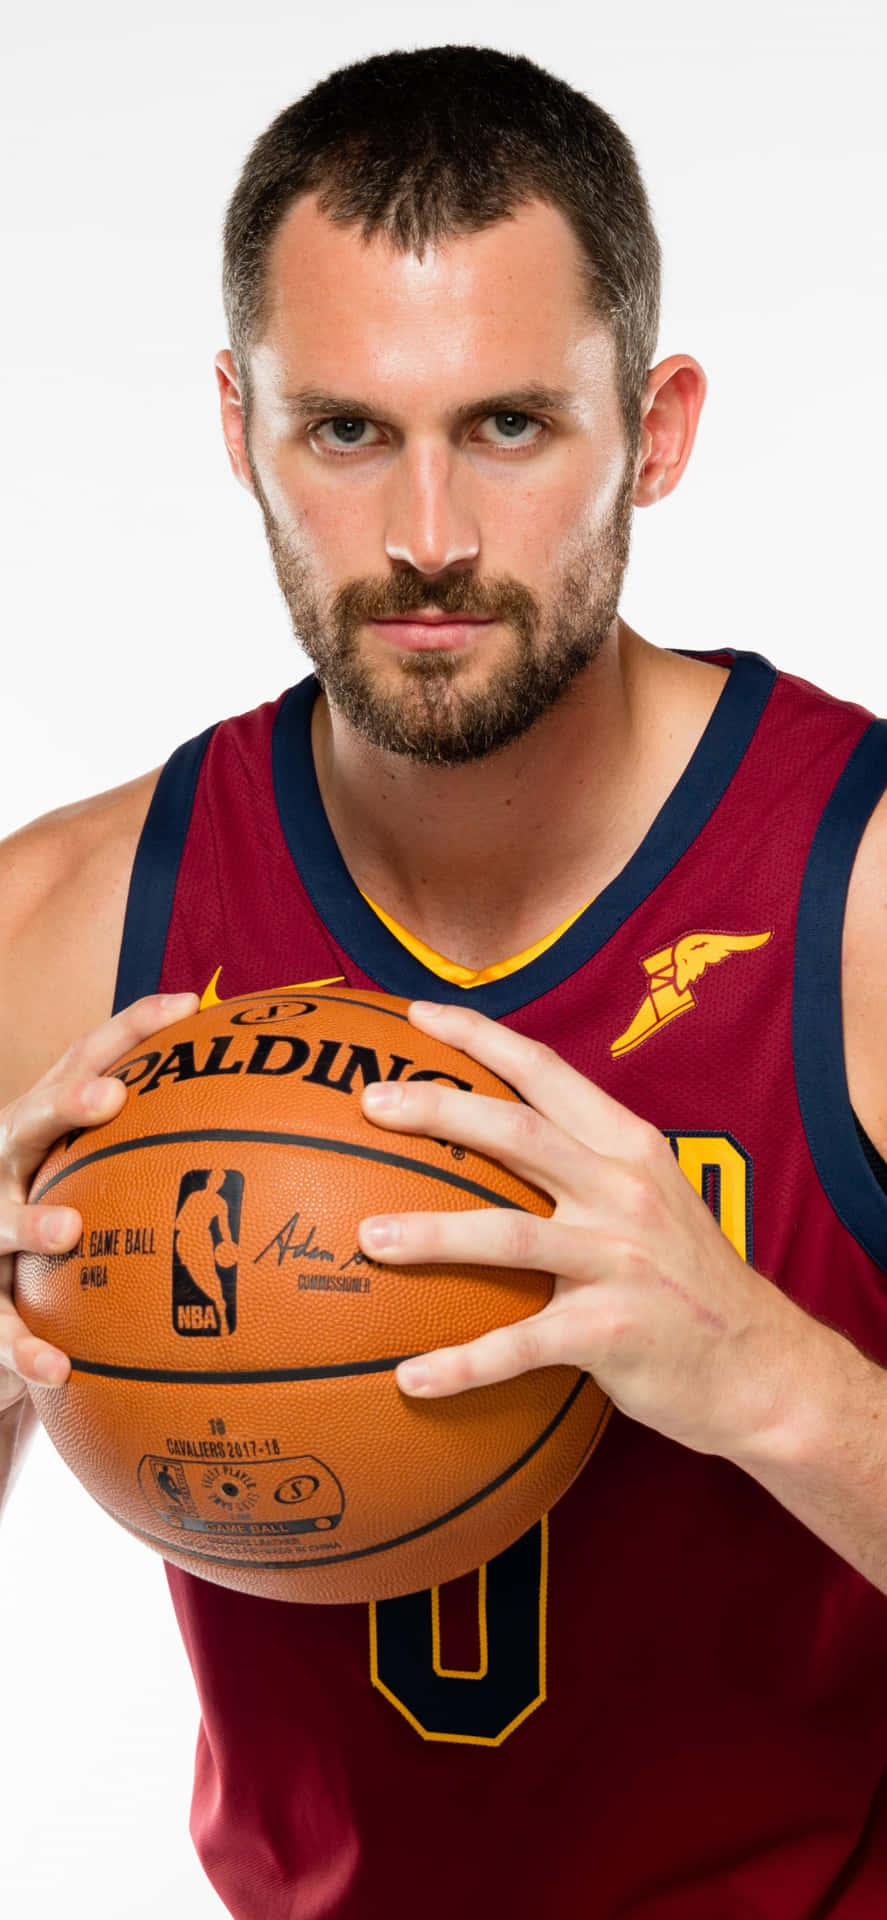 Iphone Xs Basketball Kevin Love Baggrund